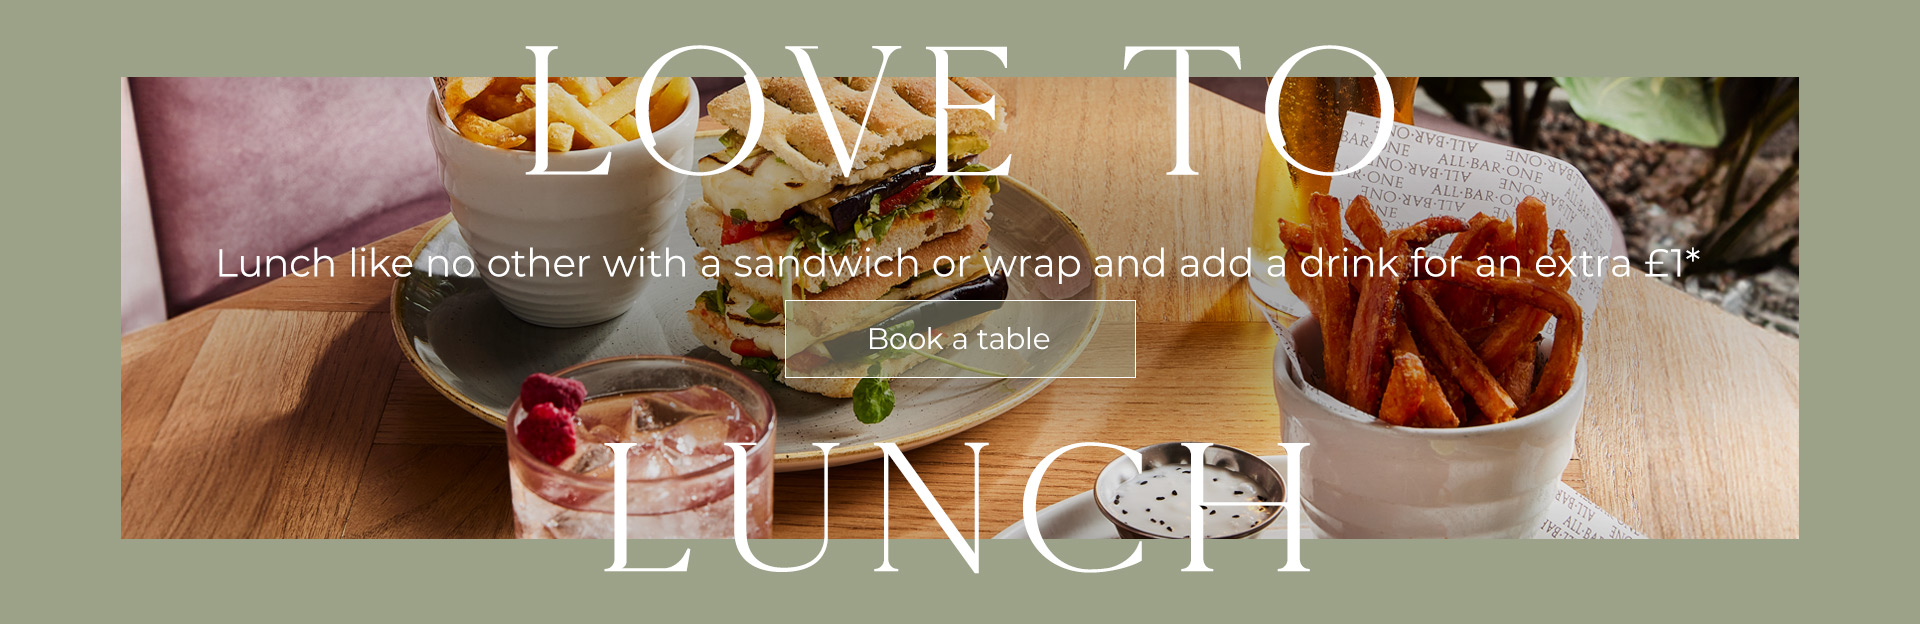 Lunch Offer at All Bar One Harrogate